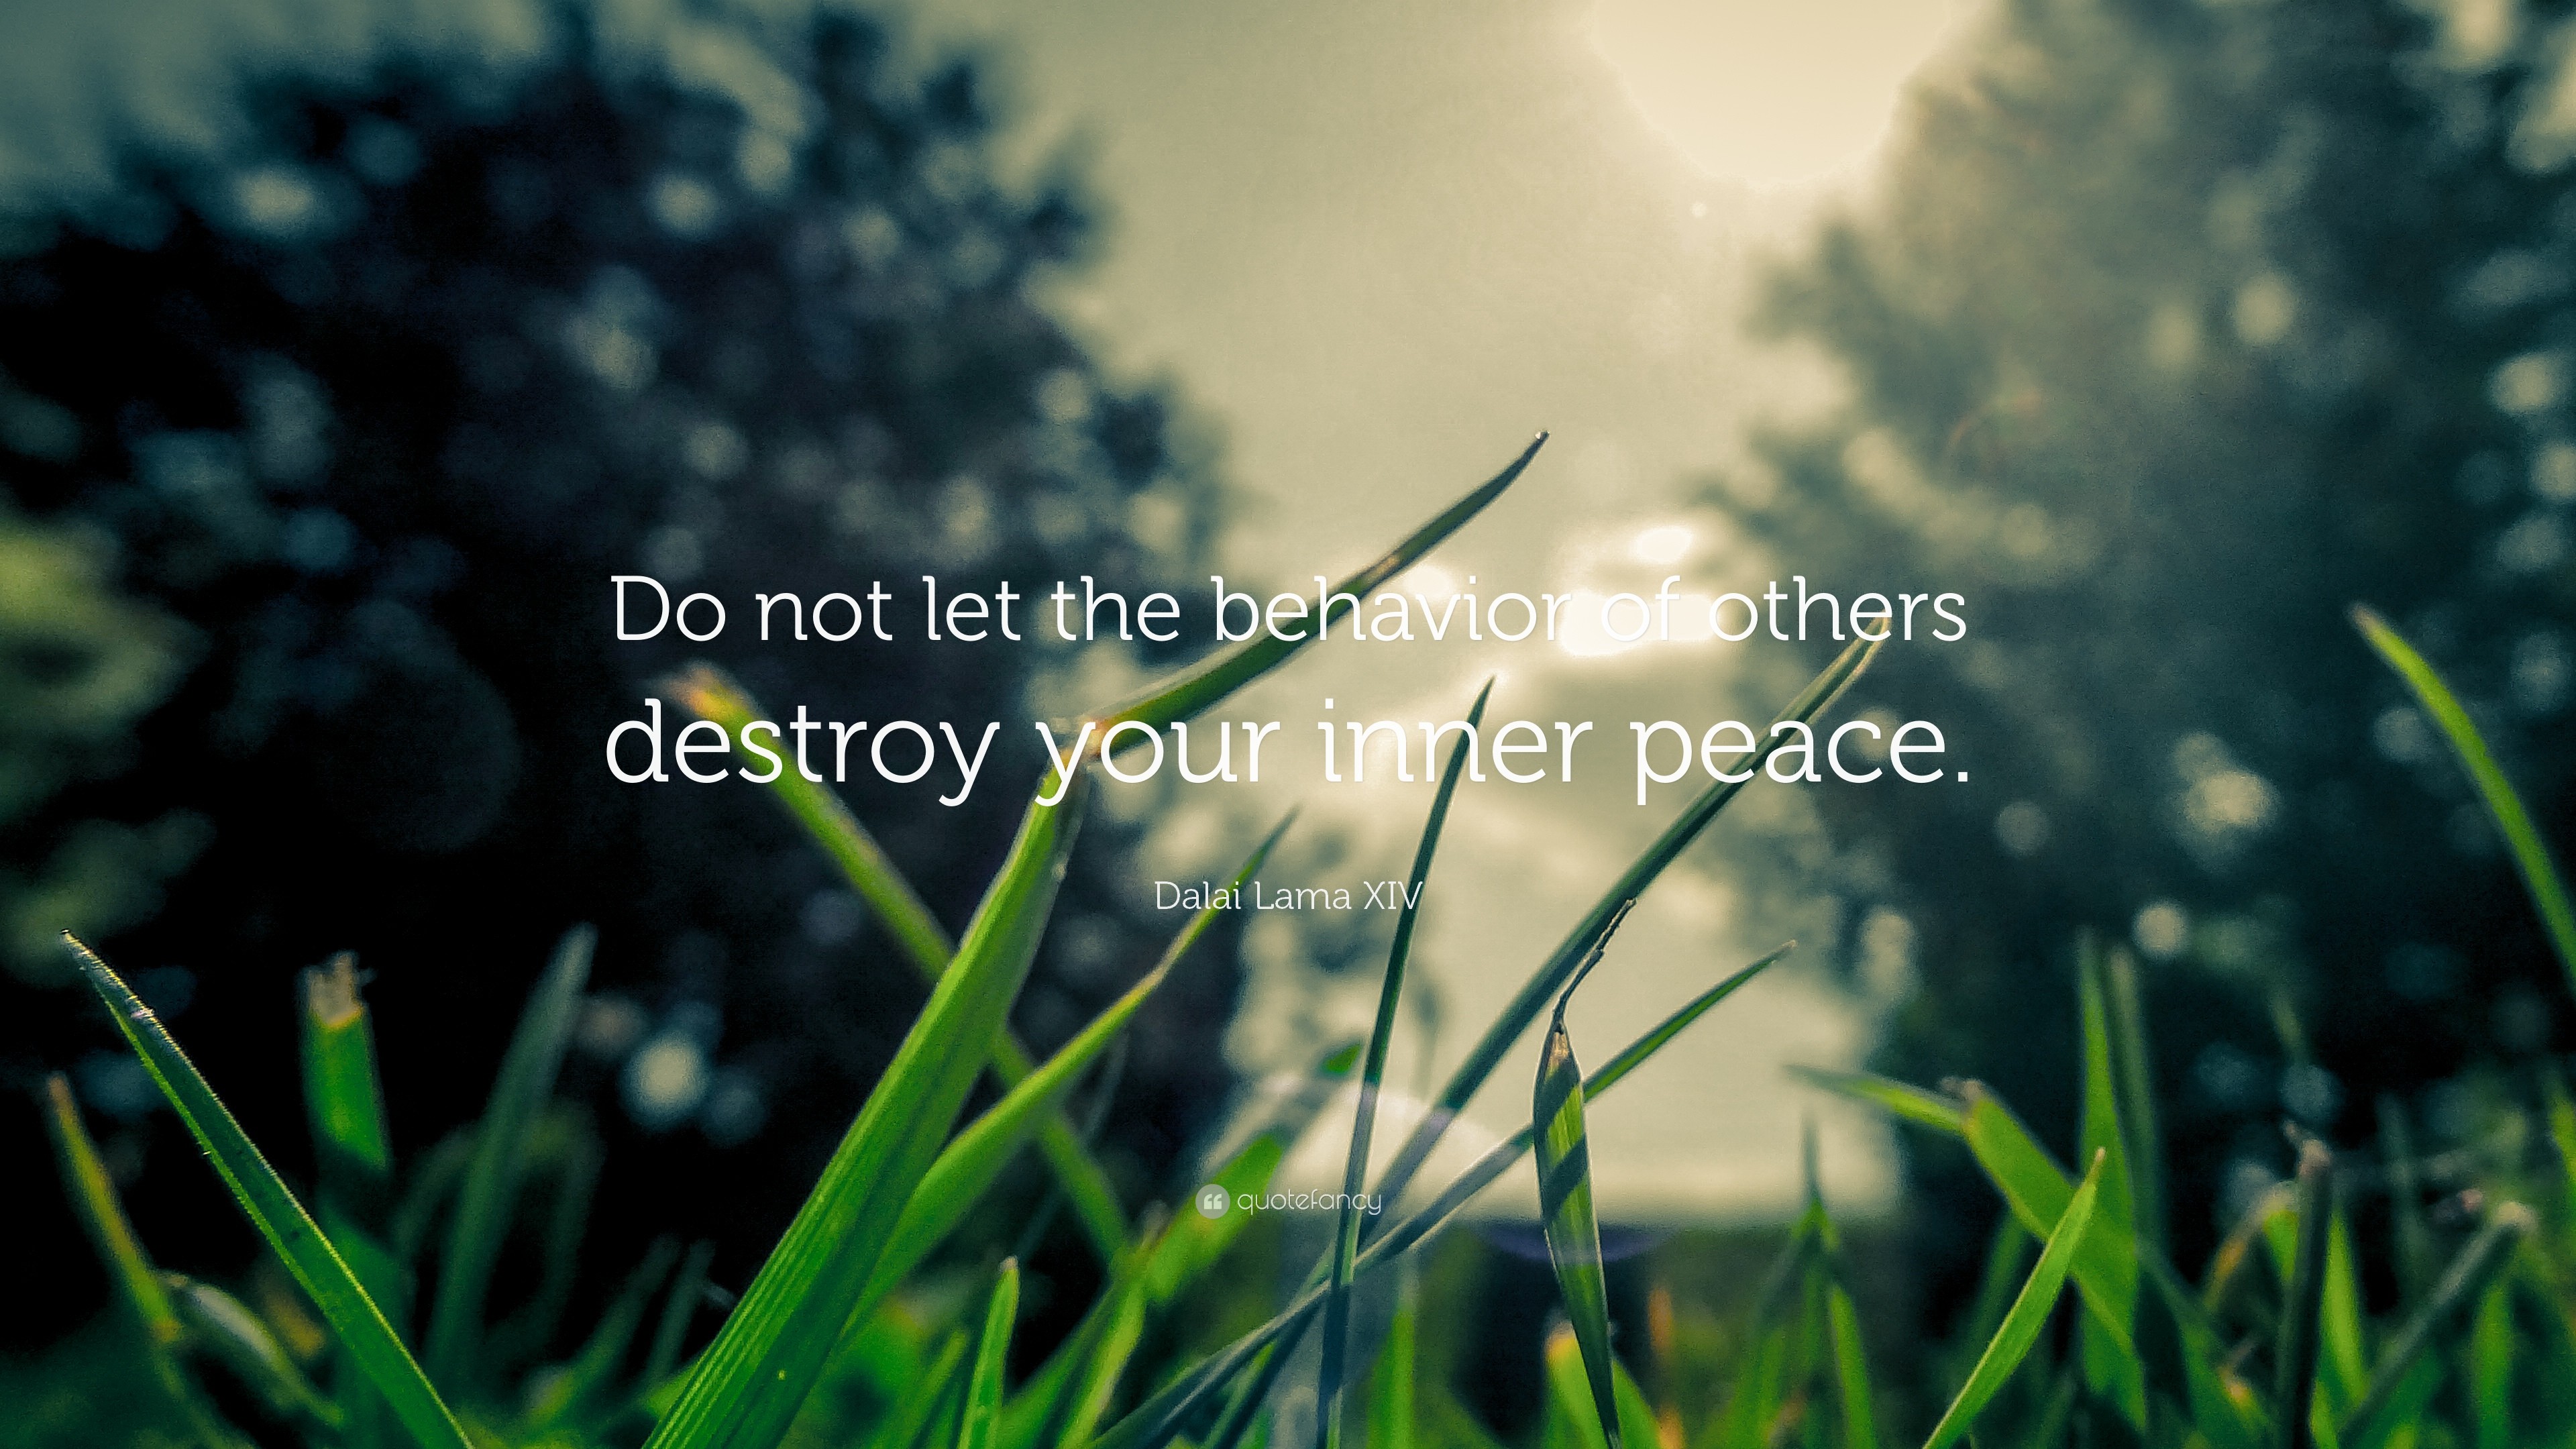 3840x2160 Dalai Lama XIV Quote: “Do not let the behavior of others destroy your inner